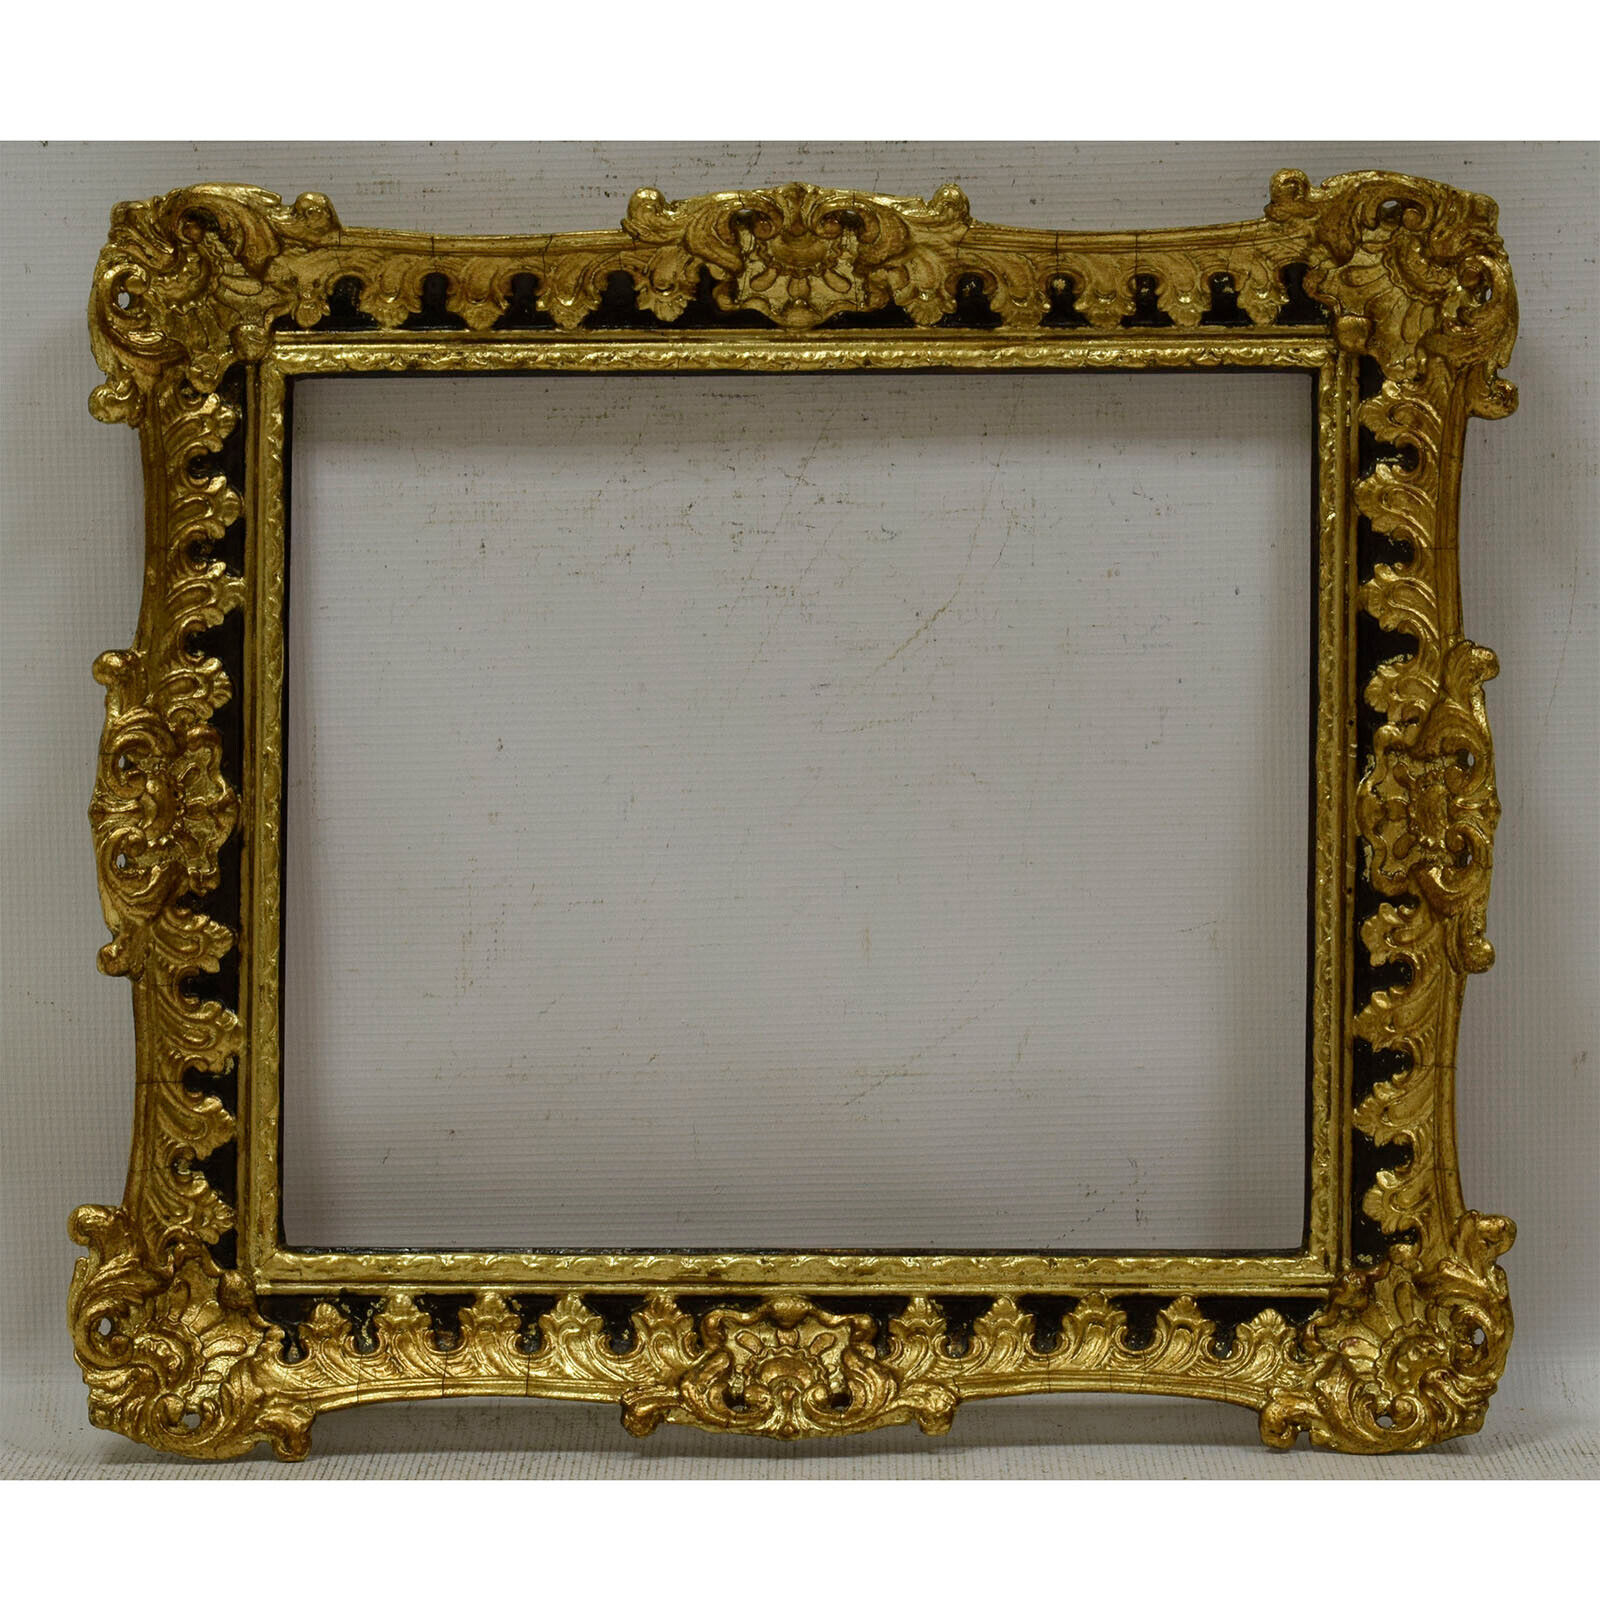 Ca 1850-1900 Old wooden frame Original condition Internal: 13.9 x 12.2 in